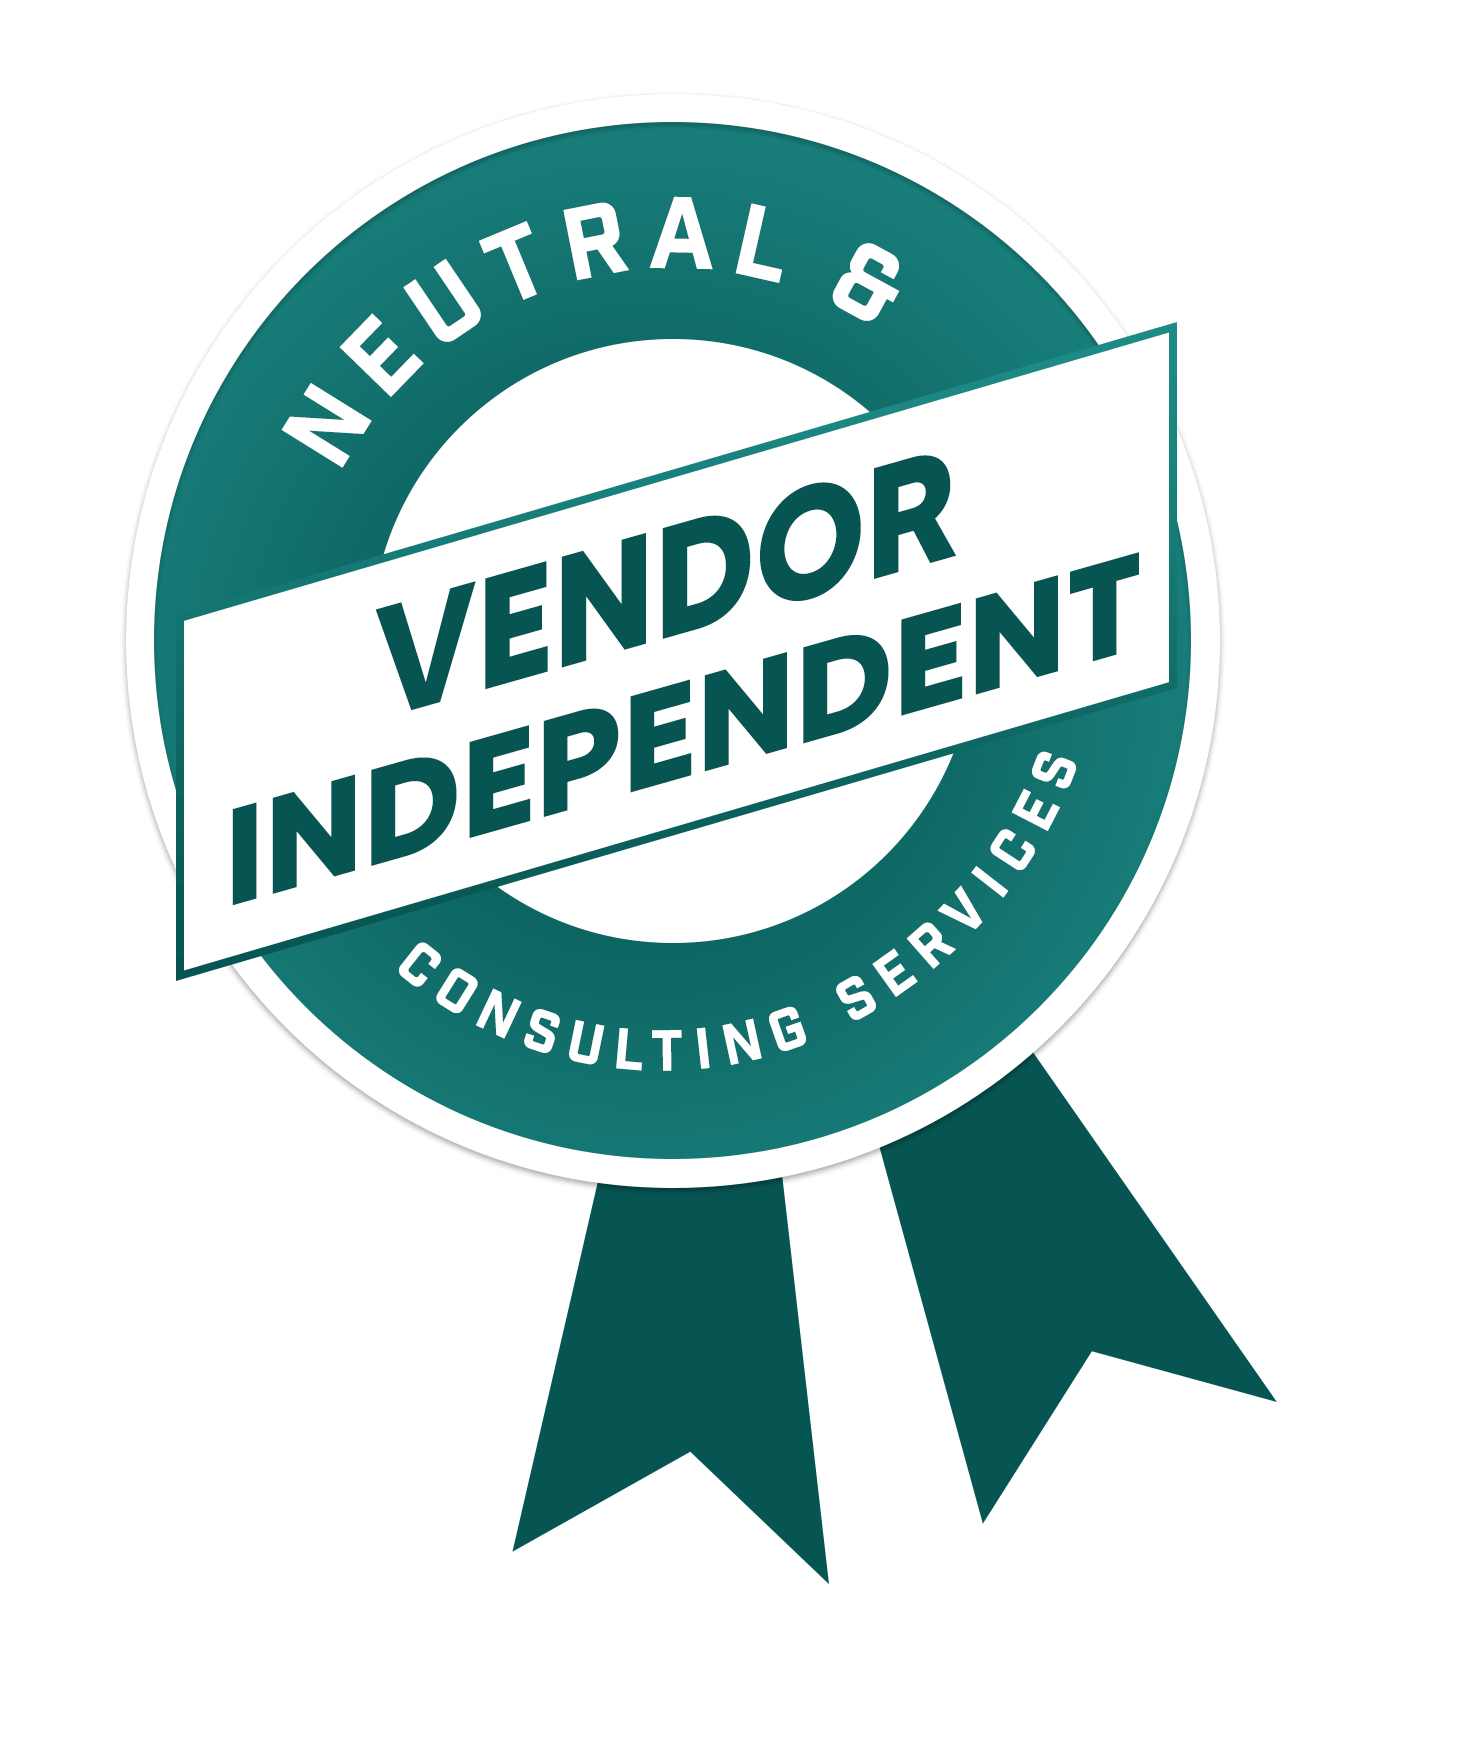 Neutral & vendor independent consulting services